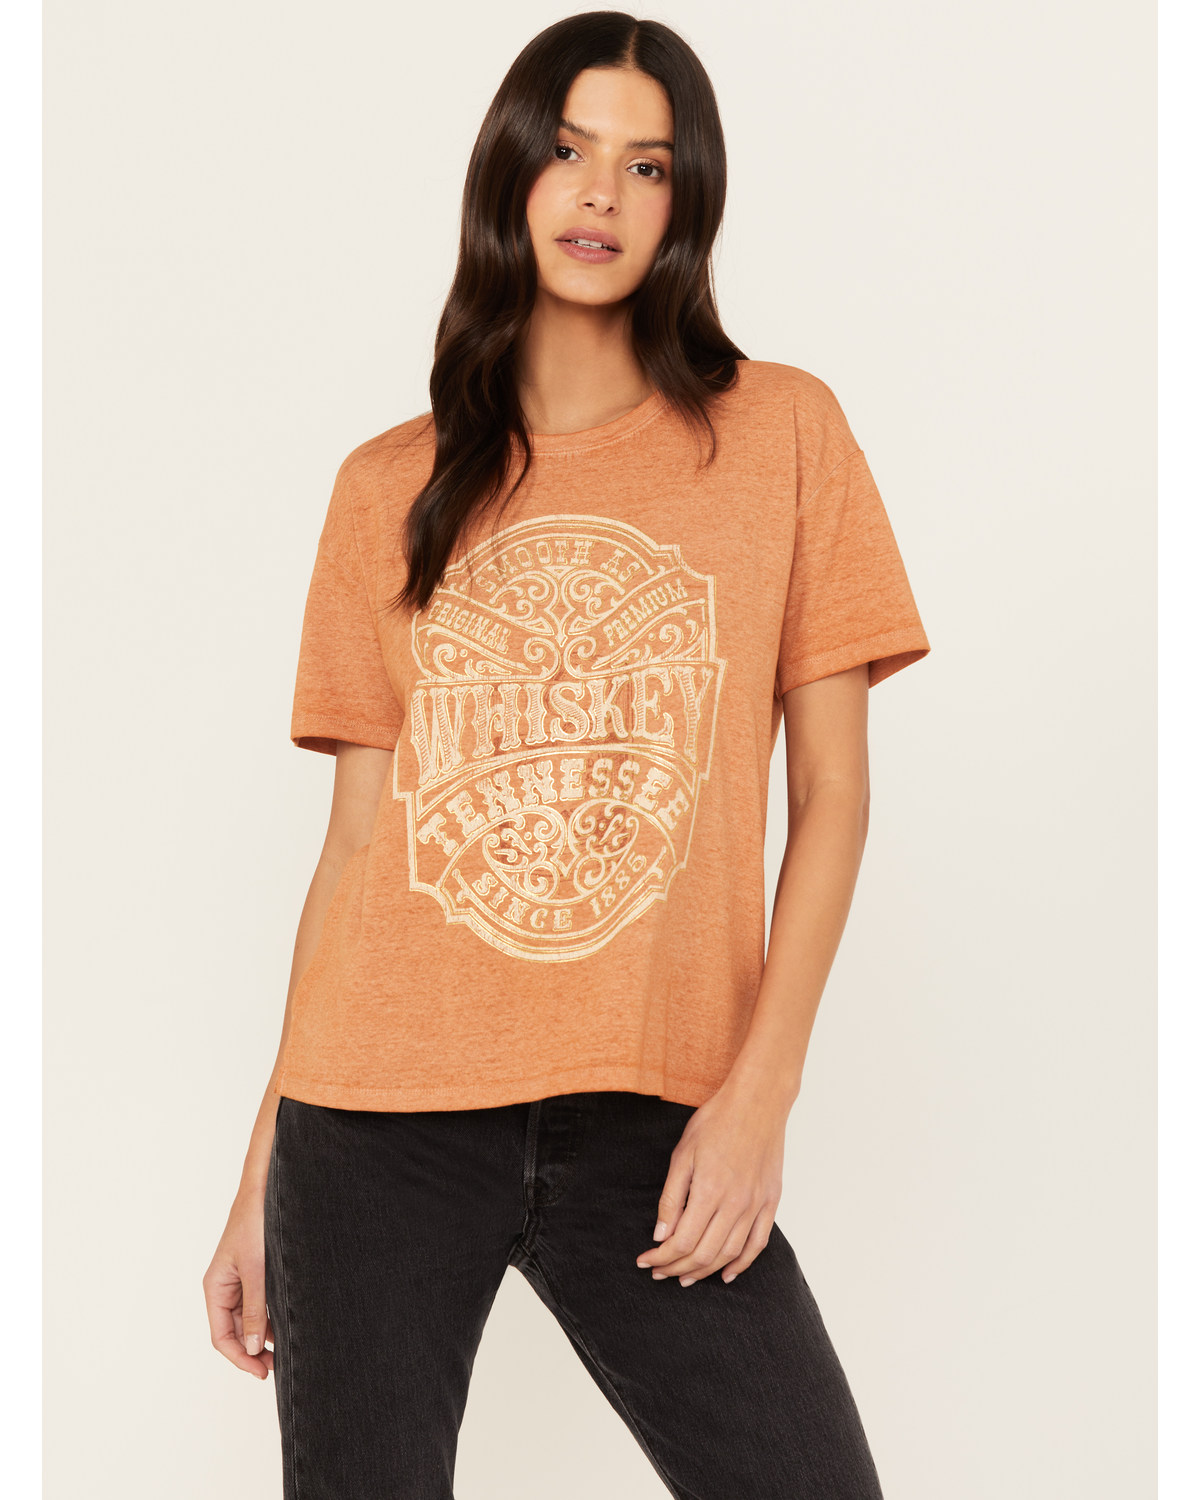 Blended Women's Tennessee Whiskey Short Sleeve Graphic Tee